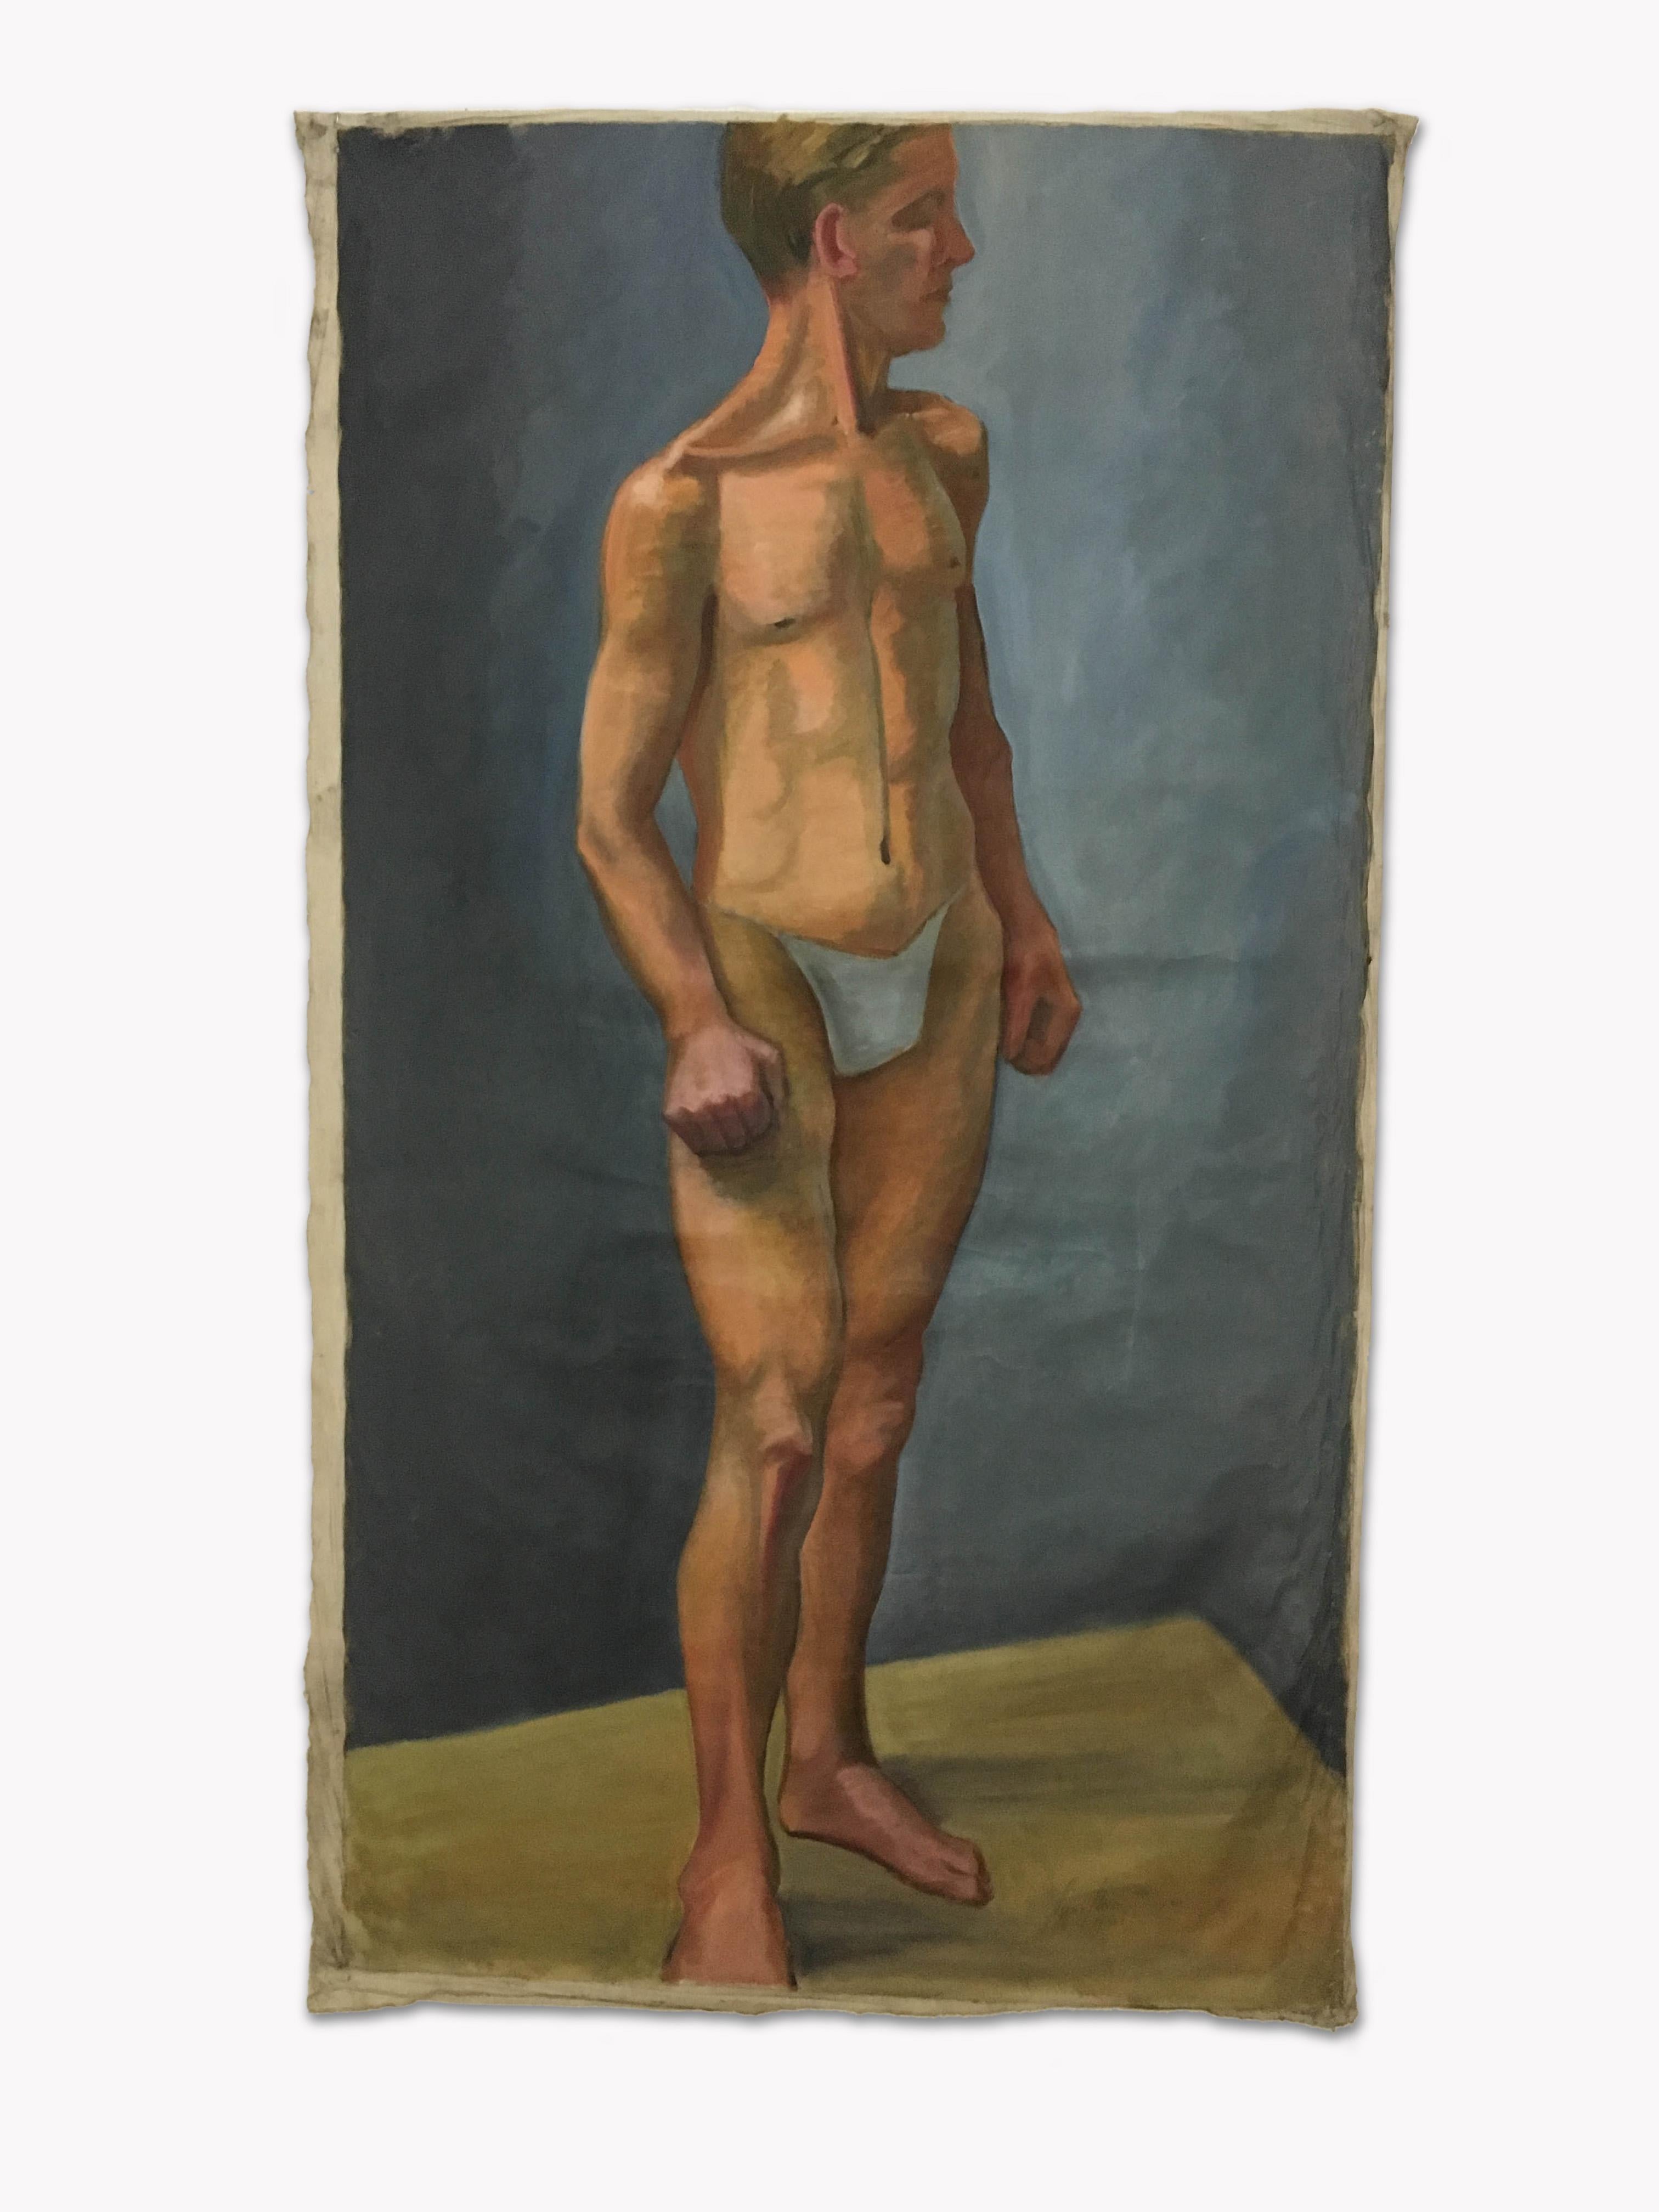 1933 Male 'White' Men Nude Portrait Study Oil Painting by Olga von Mossig-Zupan In Good Condition For Sale In Vienna, AT